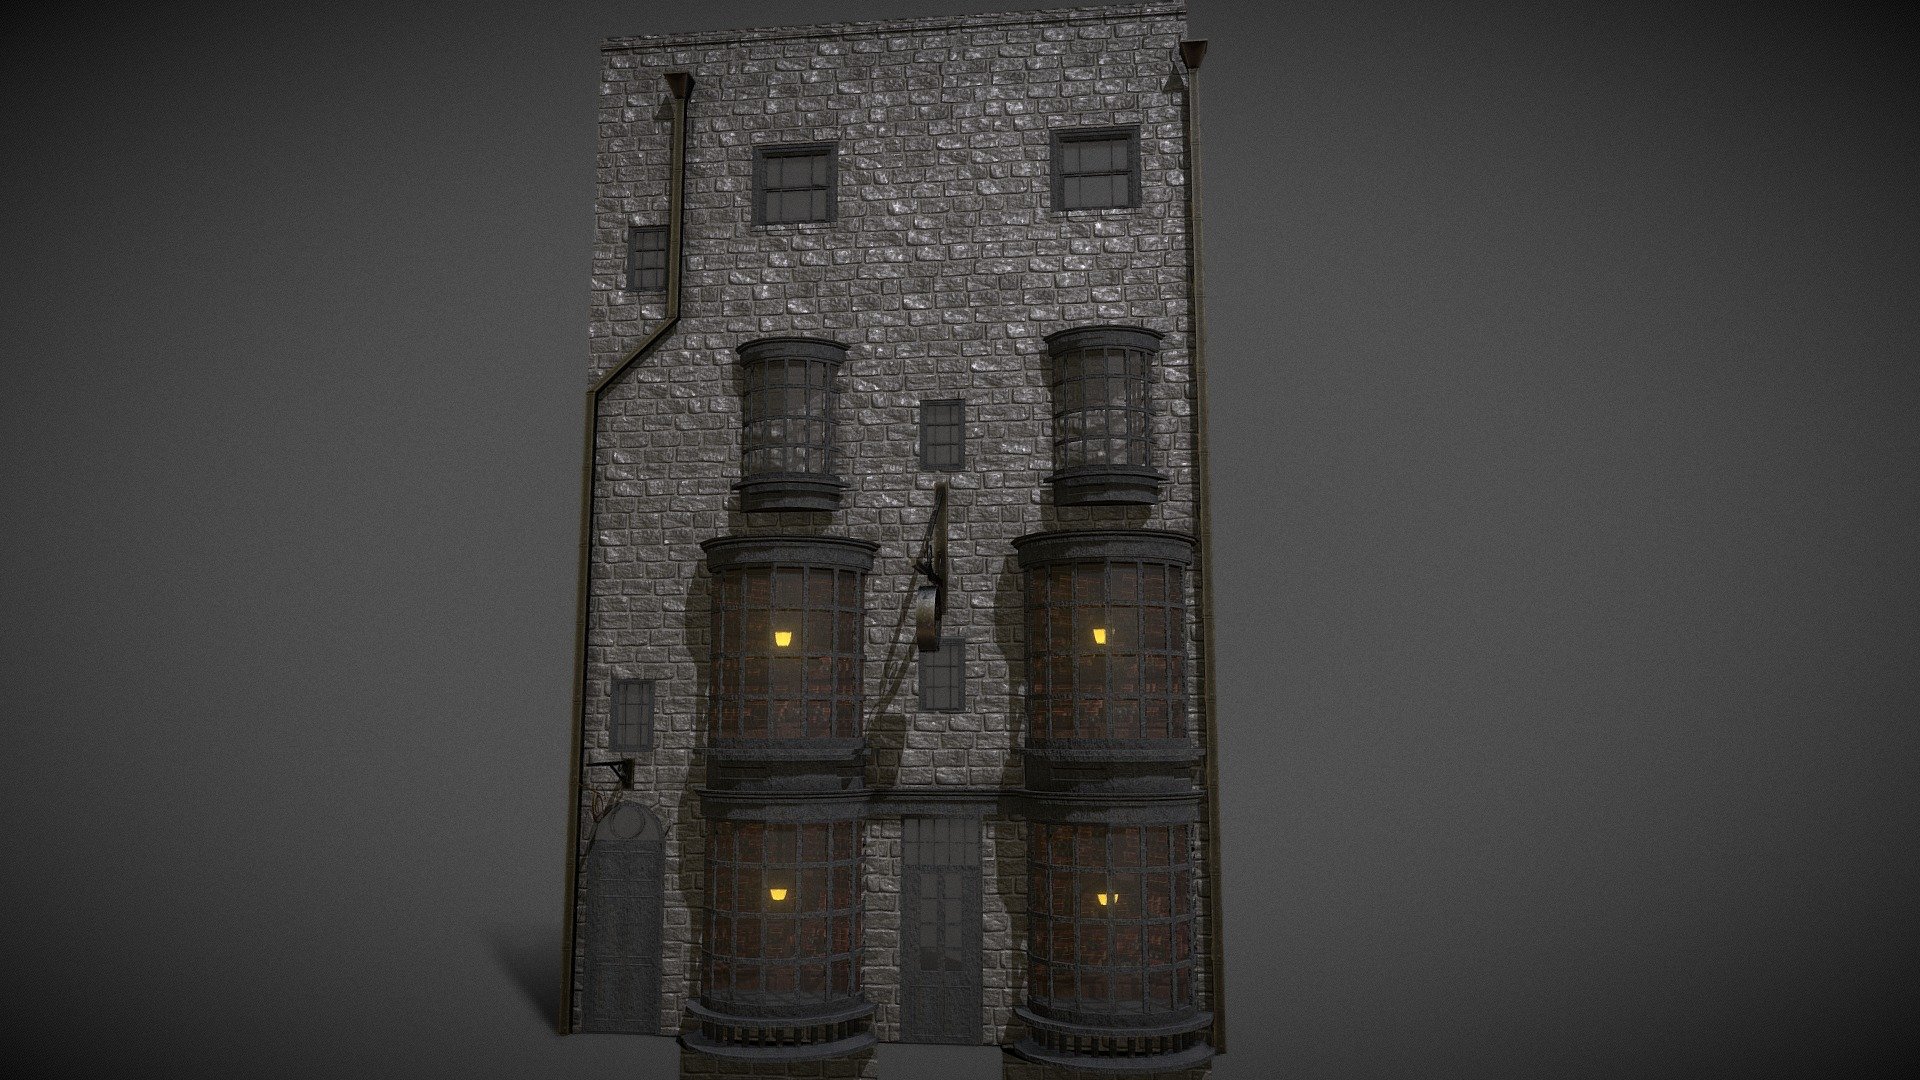 Here is the other final piece for the diagon alley scene 

This one took a lot less longet to make probably aboyt 6 to 8 hours cause i already had alot of the pieces - Ollivanders Shop - 3D model by ElliottA 3d model